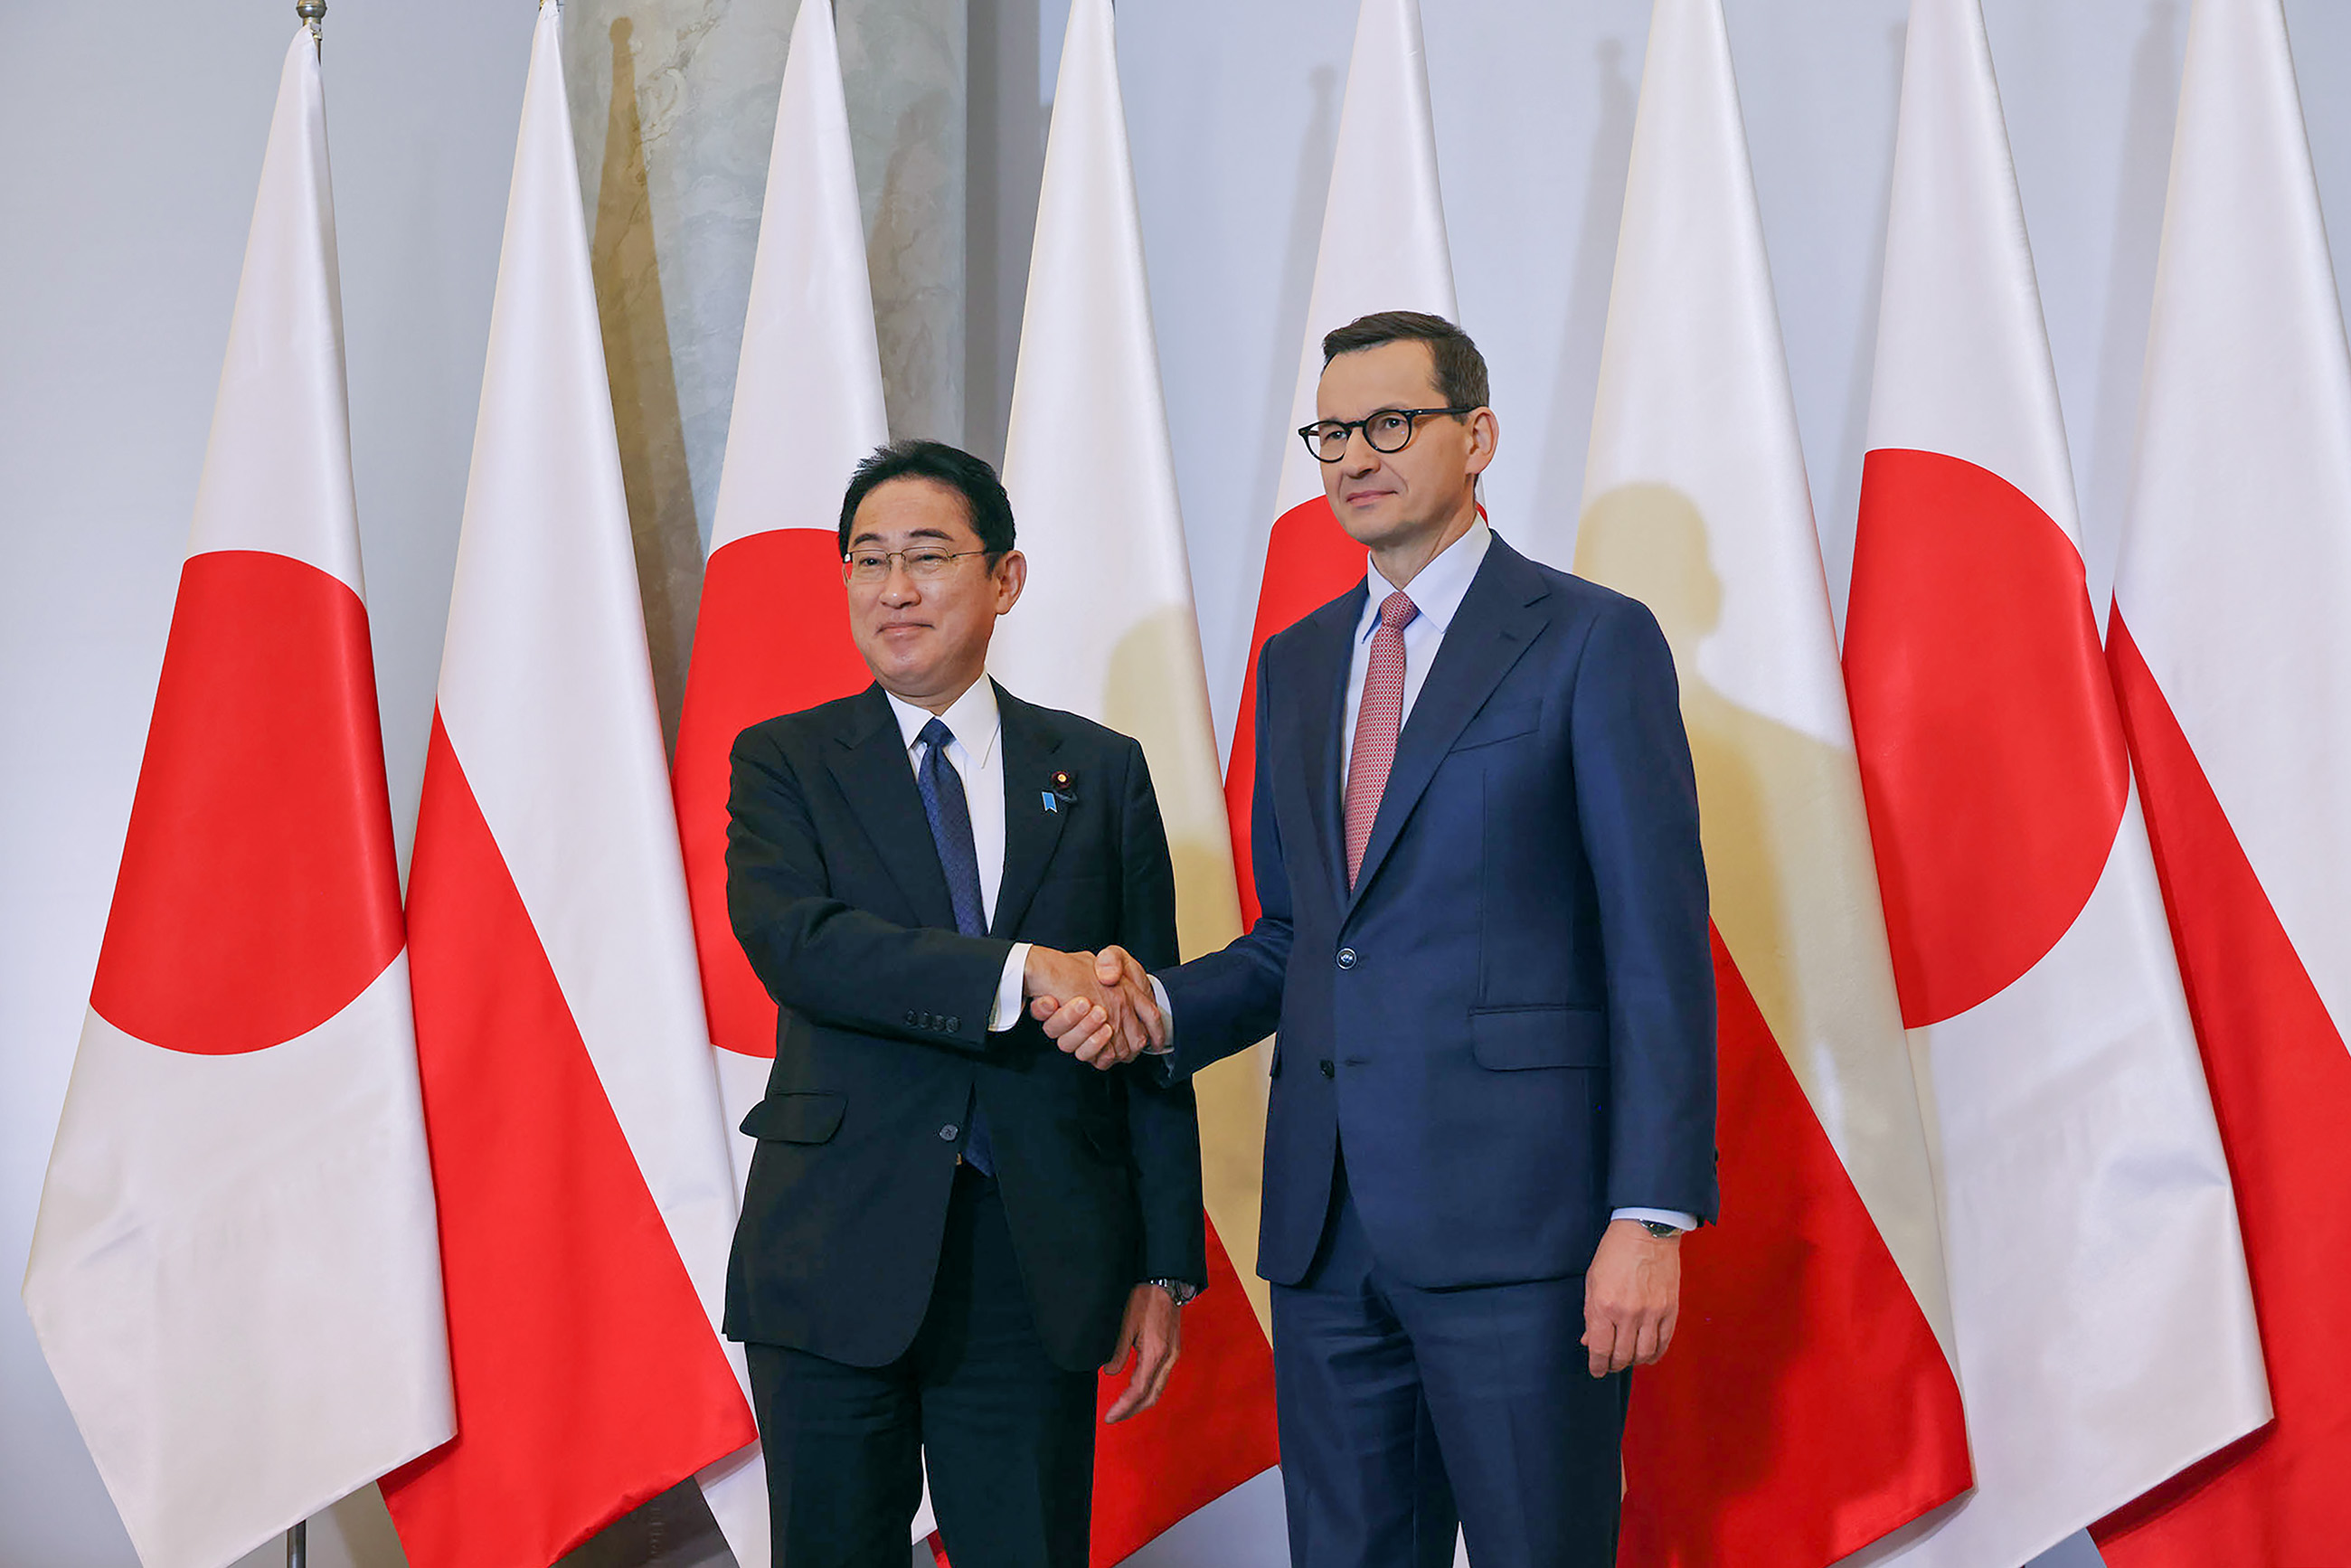 Prime Minister Kishida holding a summit meeting with Prime Minister Morawiecki of Poland